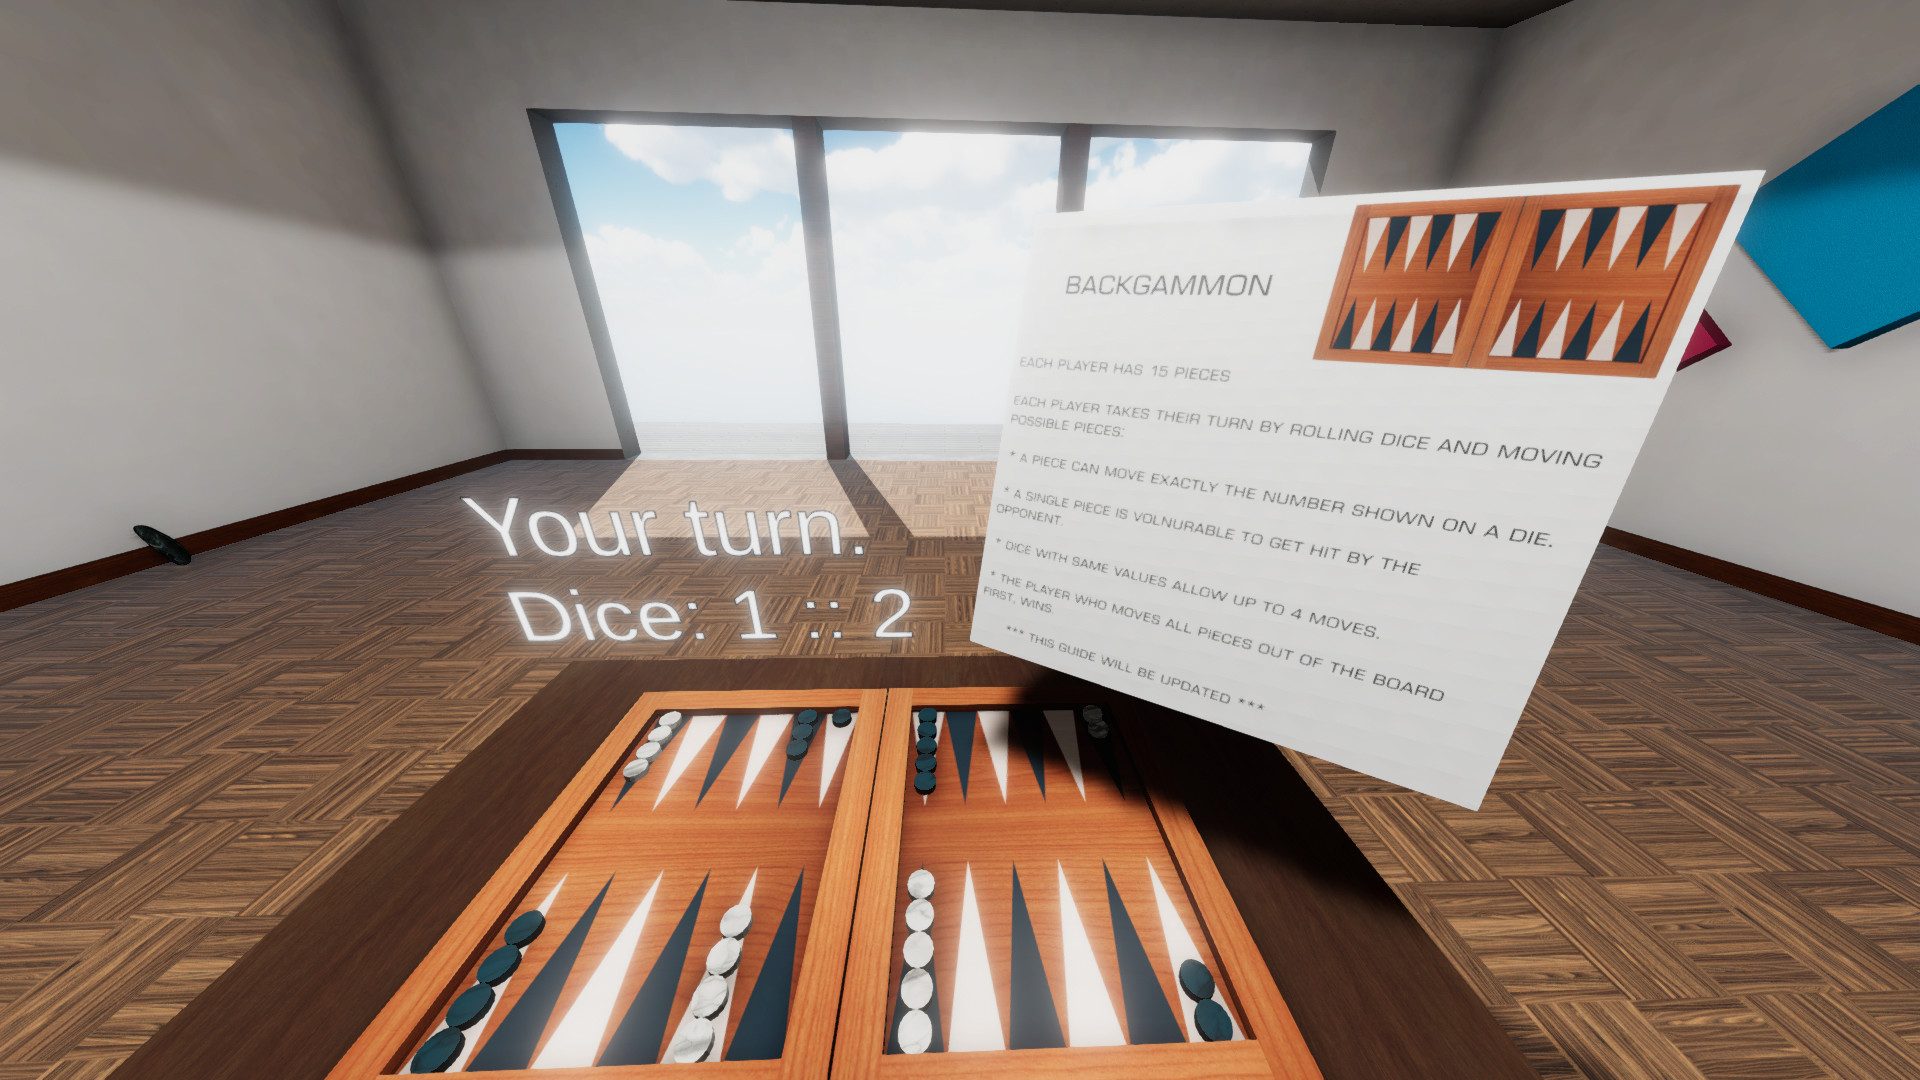 Board Games VR Free Download